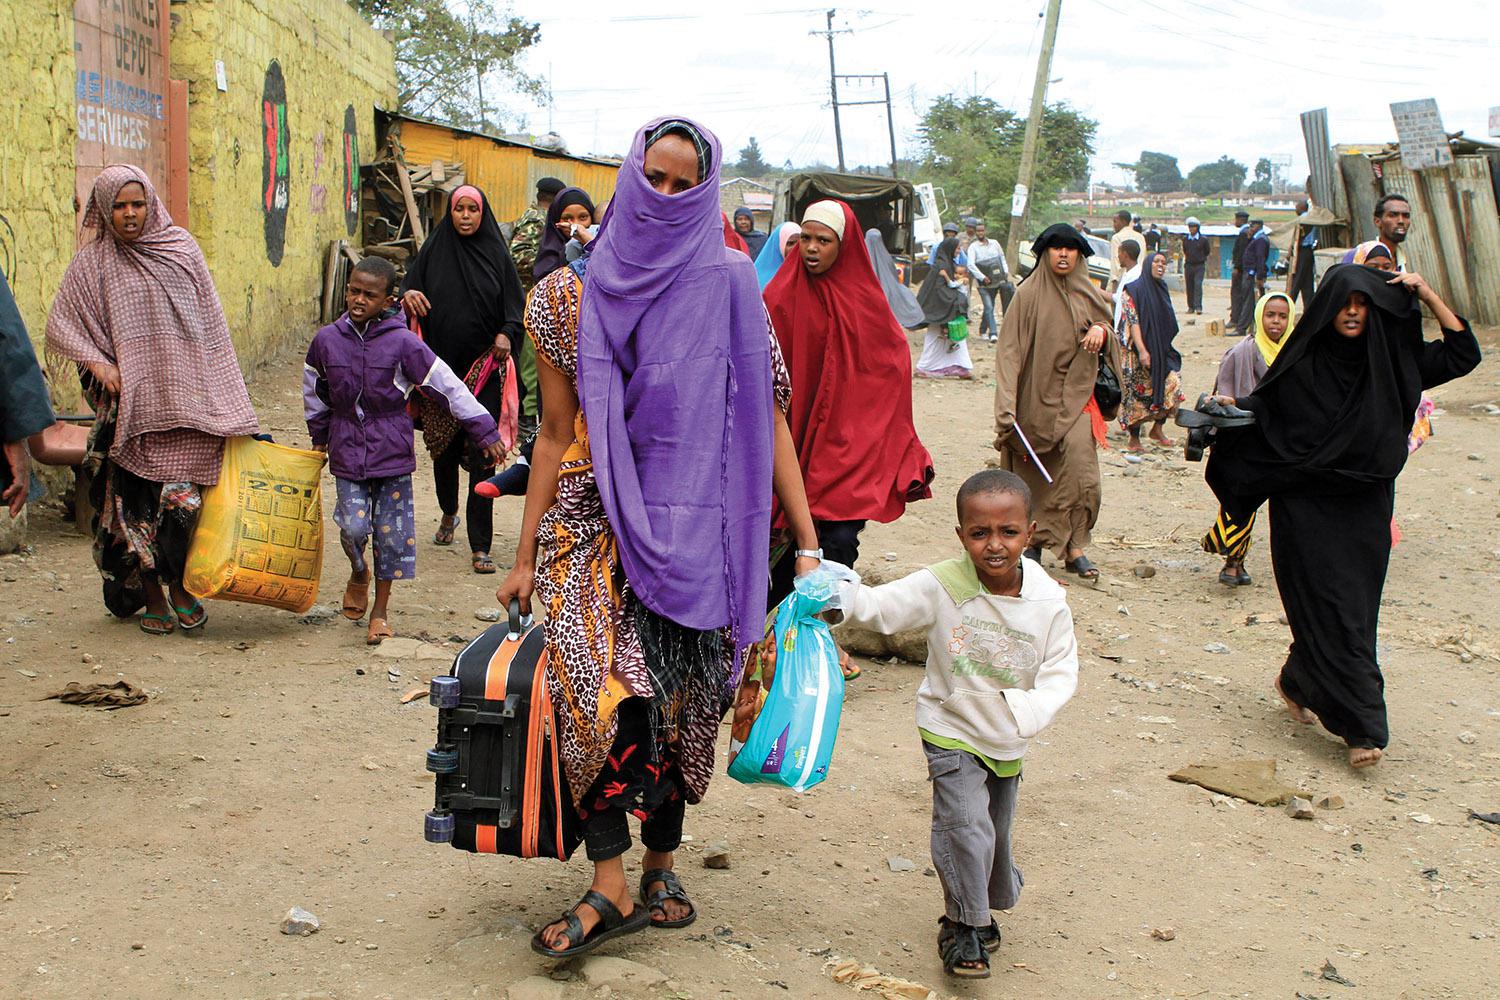 Somali women and children fleeing their homes in Nairobi’s predominantly Somali suburb of Eastleigh on November 20, 2012, two days after an attack on a bus by unknown perpetrators caused Kenyan gangs to riot and attack Somali refugees and Somali Kenyans. 